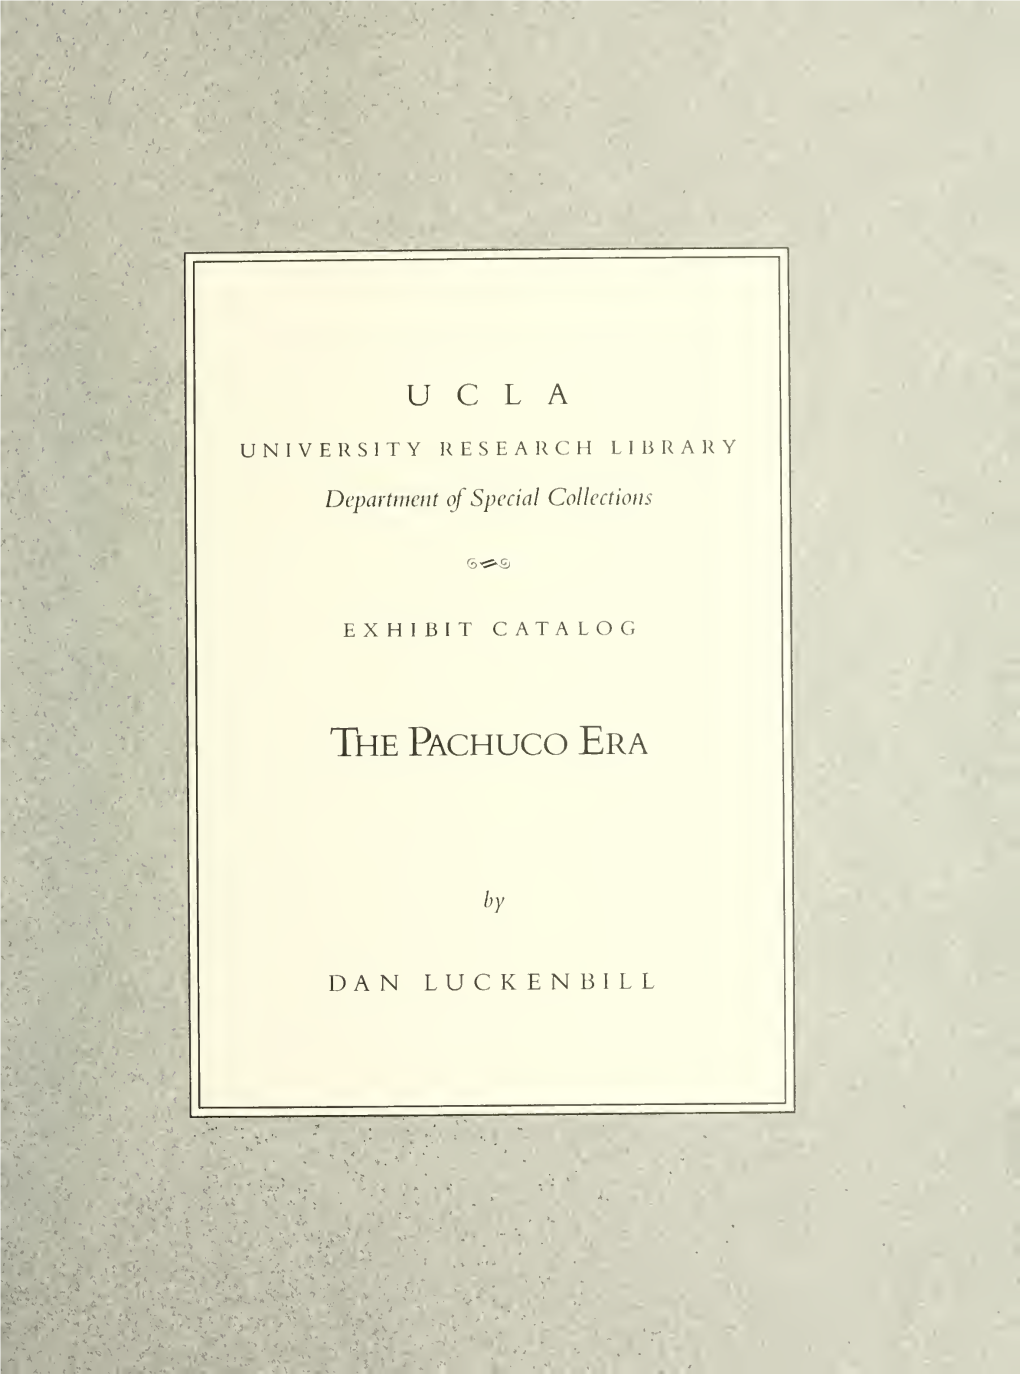 The Pachuco Era : Catalog of an Exhibit, University Research Library